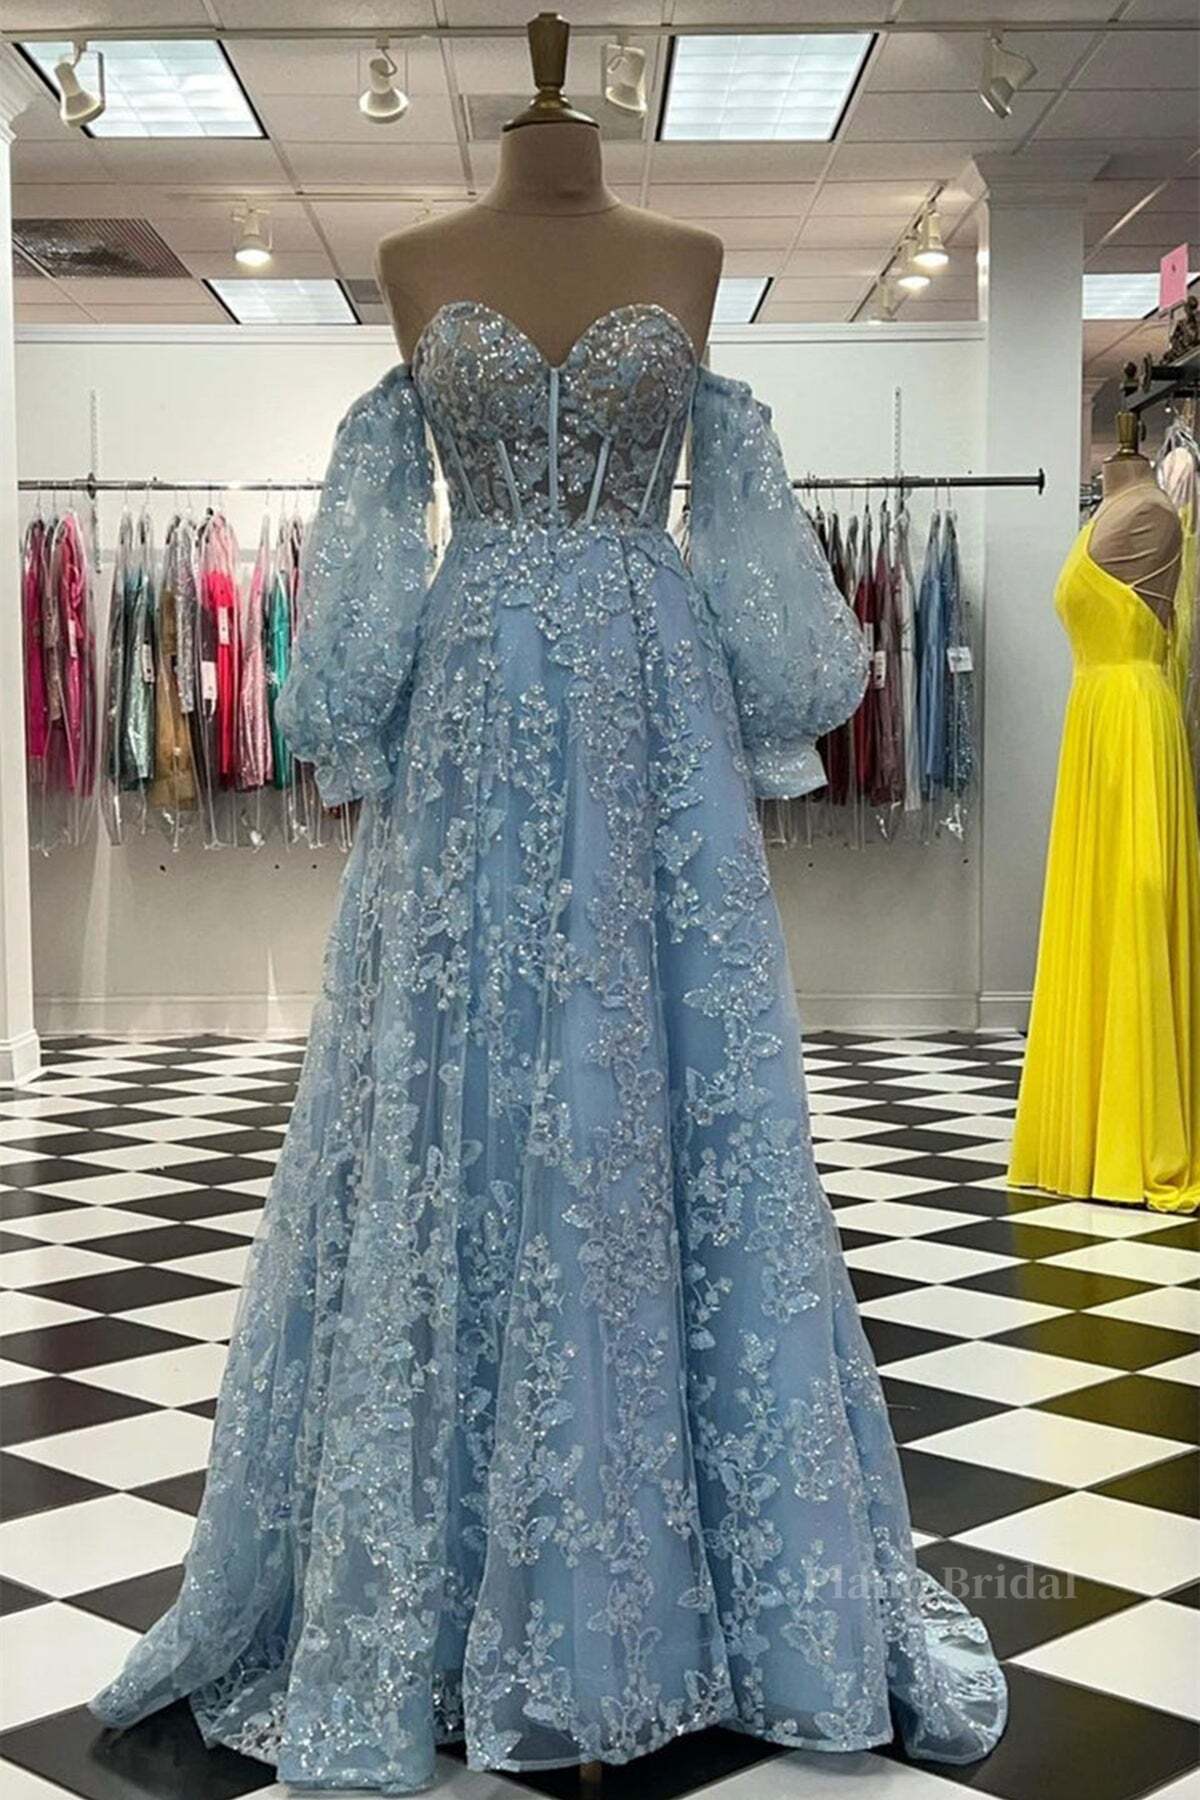 Sweetheart Neck Blue Lace Appliques Long Prom Dress with Long Sleeves, Blue Lace Floral Formal Graduation Evening Dress